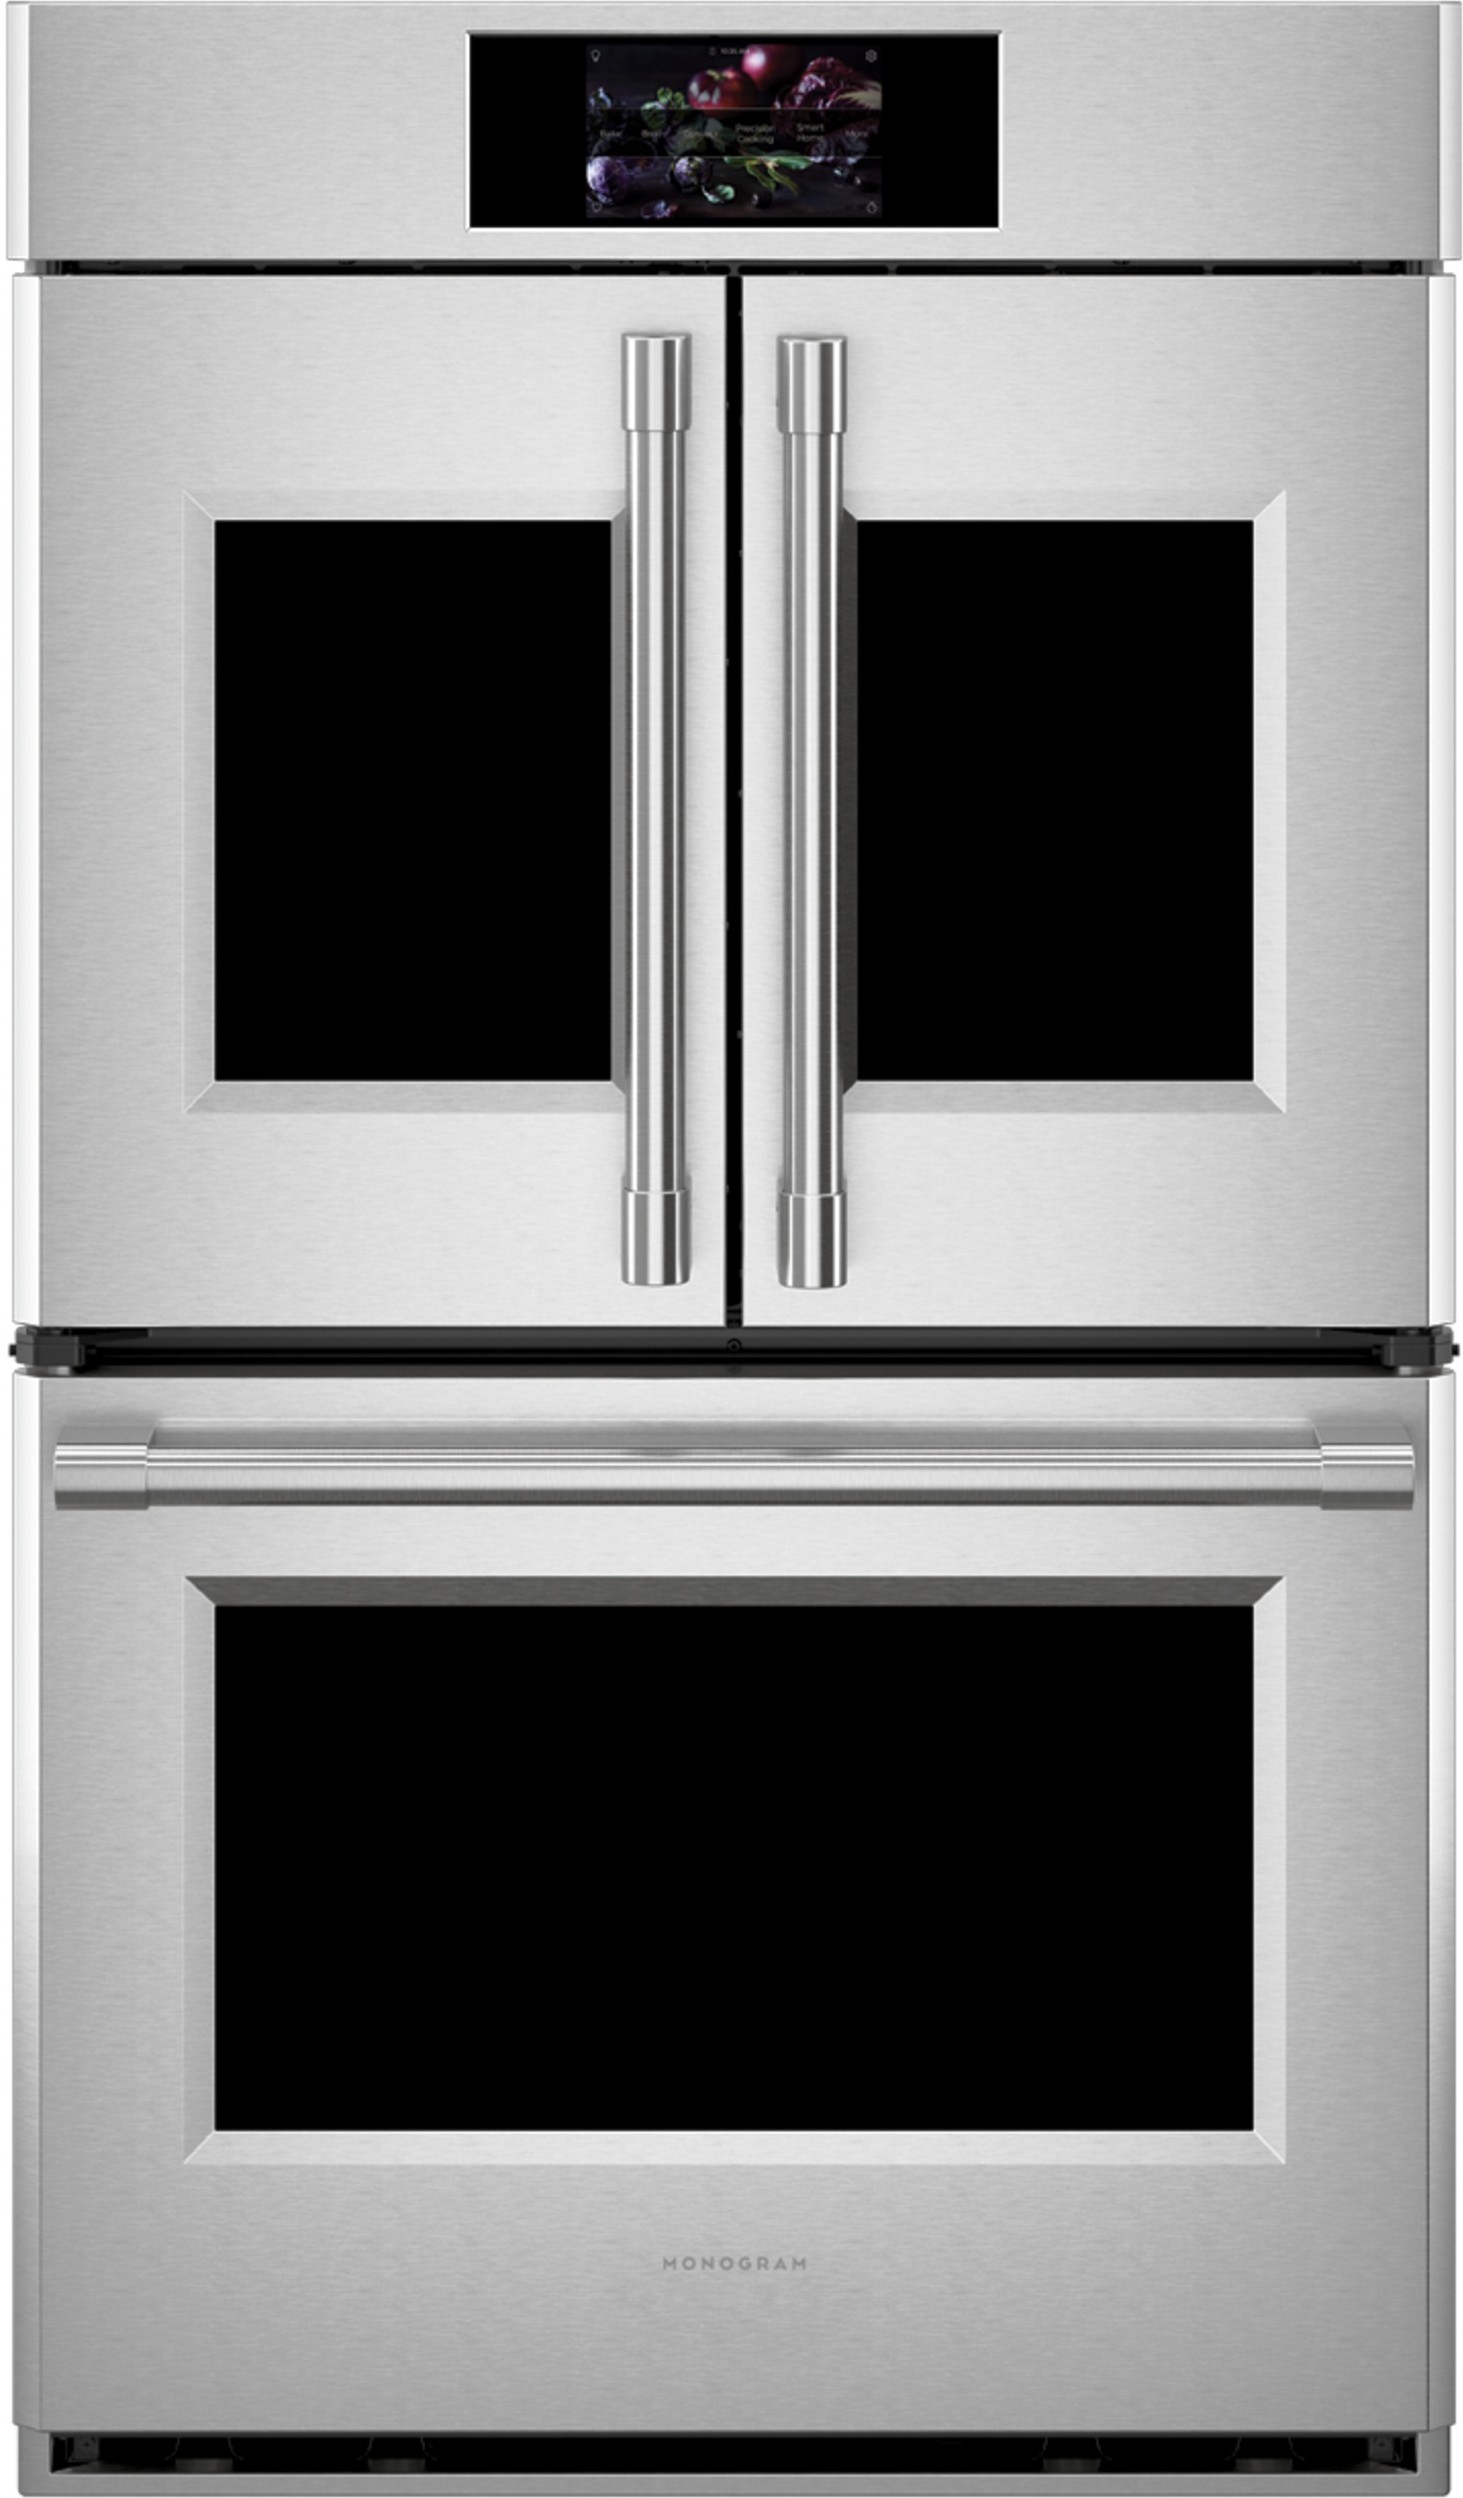 Monogram Statement 30 Double Electric Wall Oven ZTDX1FPSNSS